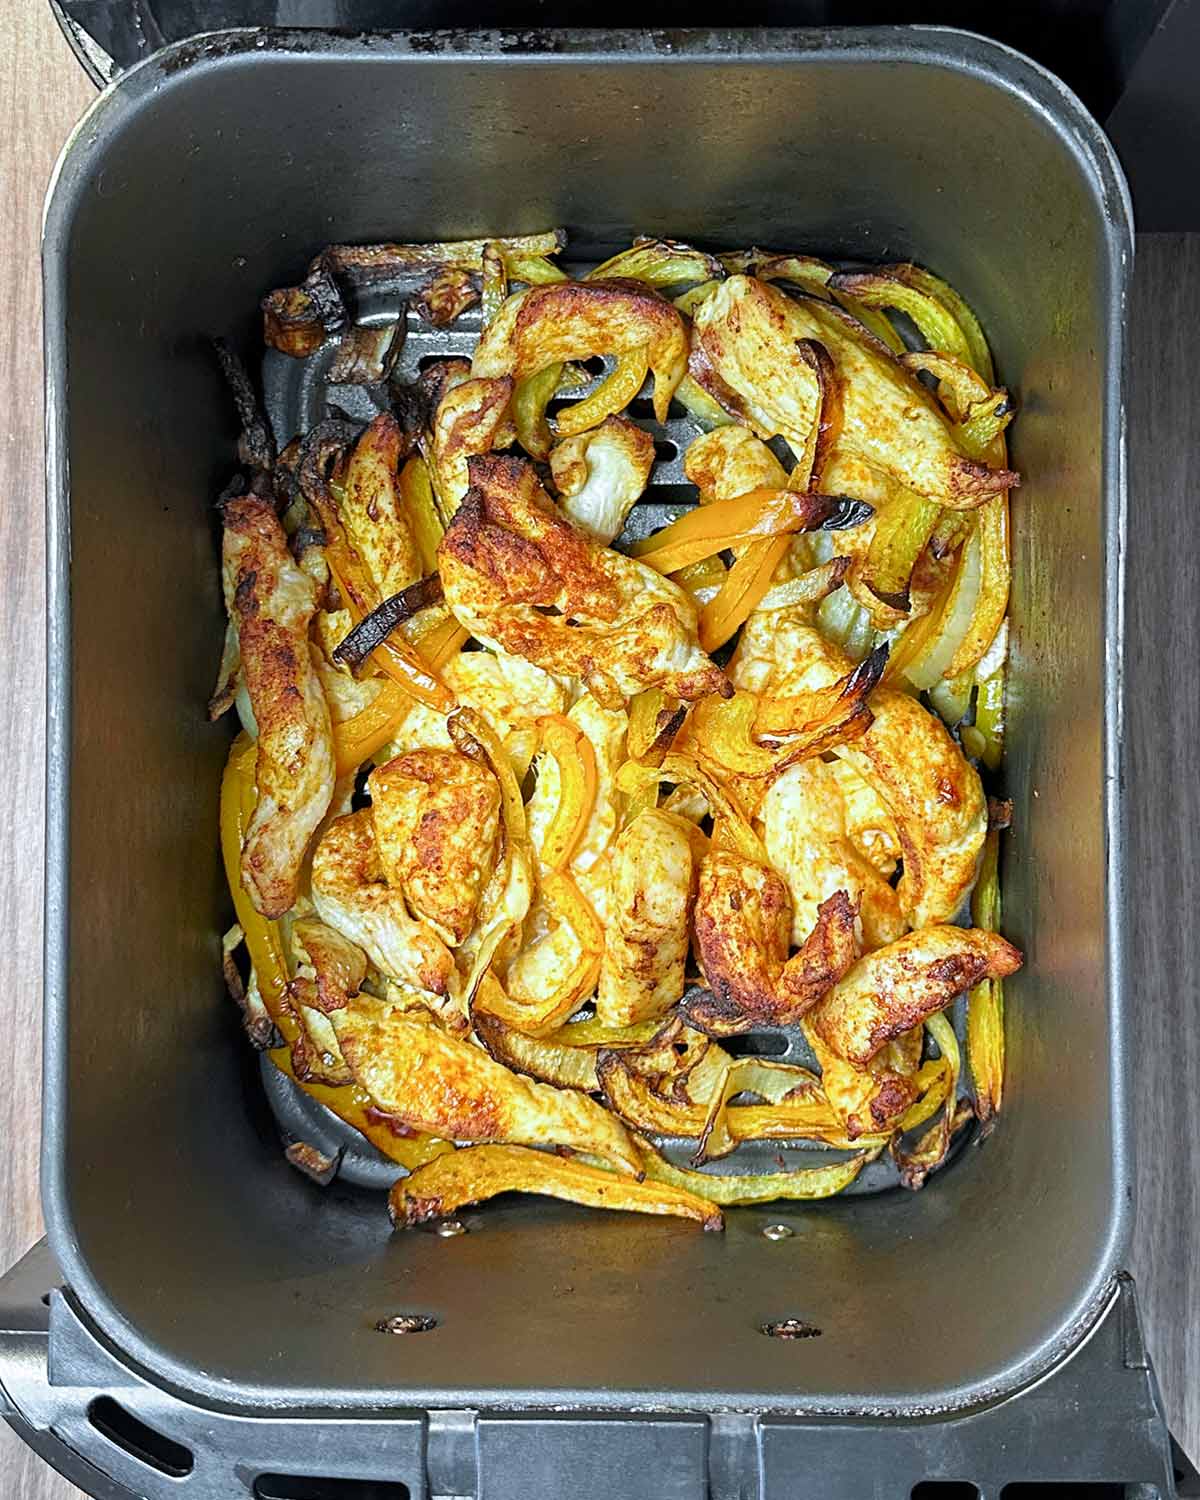 Cooked chicken, peppers and onions in an air fryer.